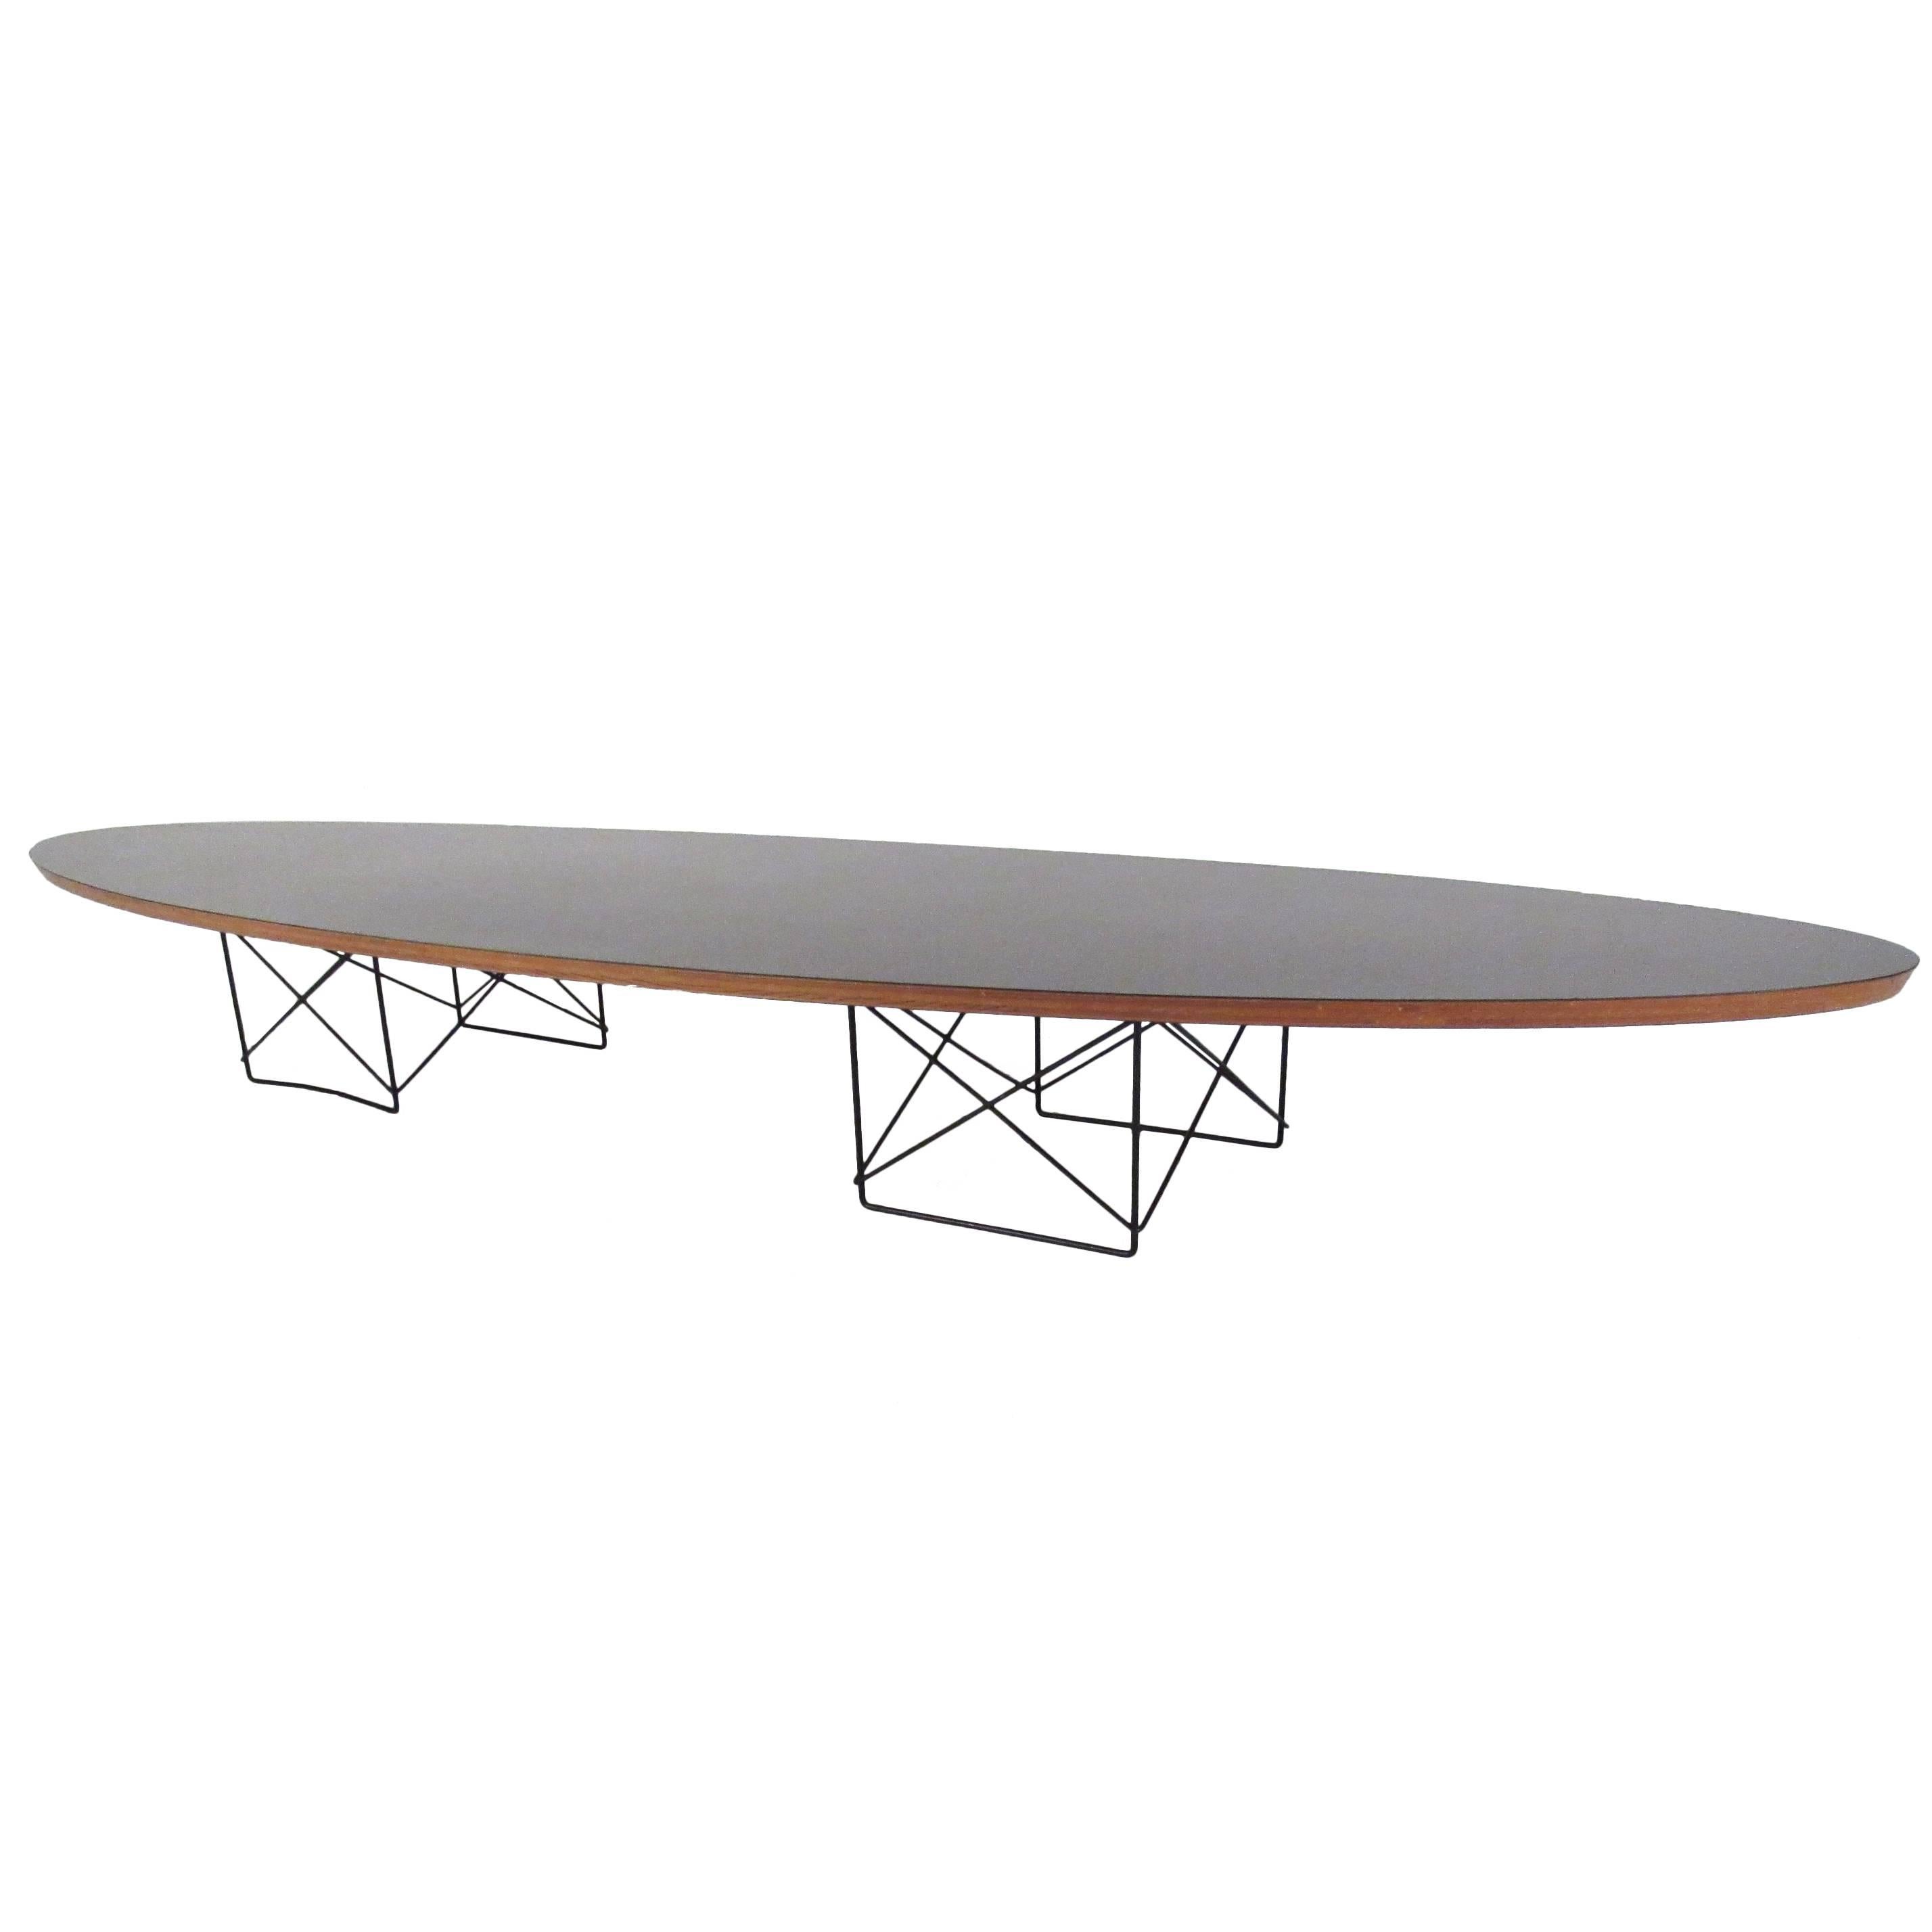 Charles & Ray Eames Surfboard Coffee Table for Herman Miller